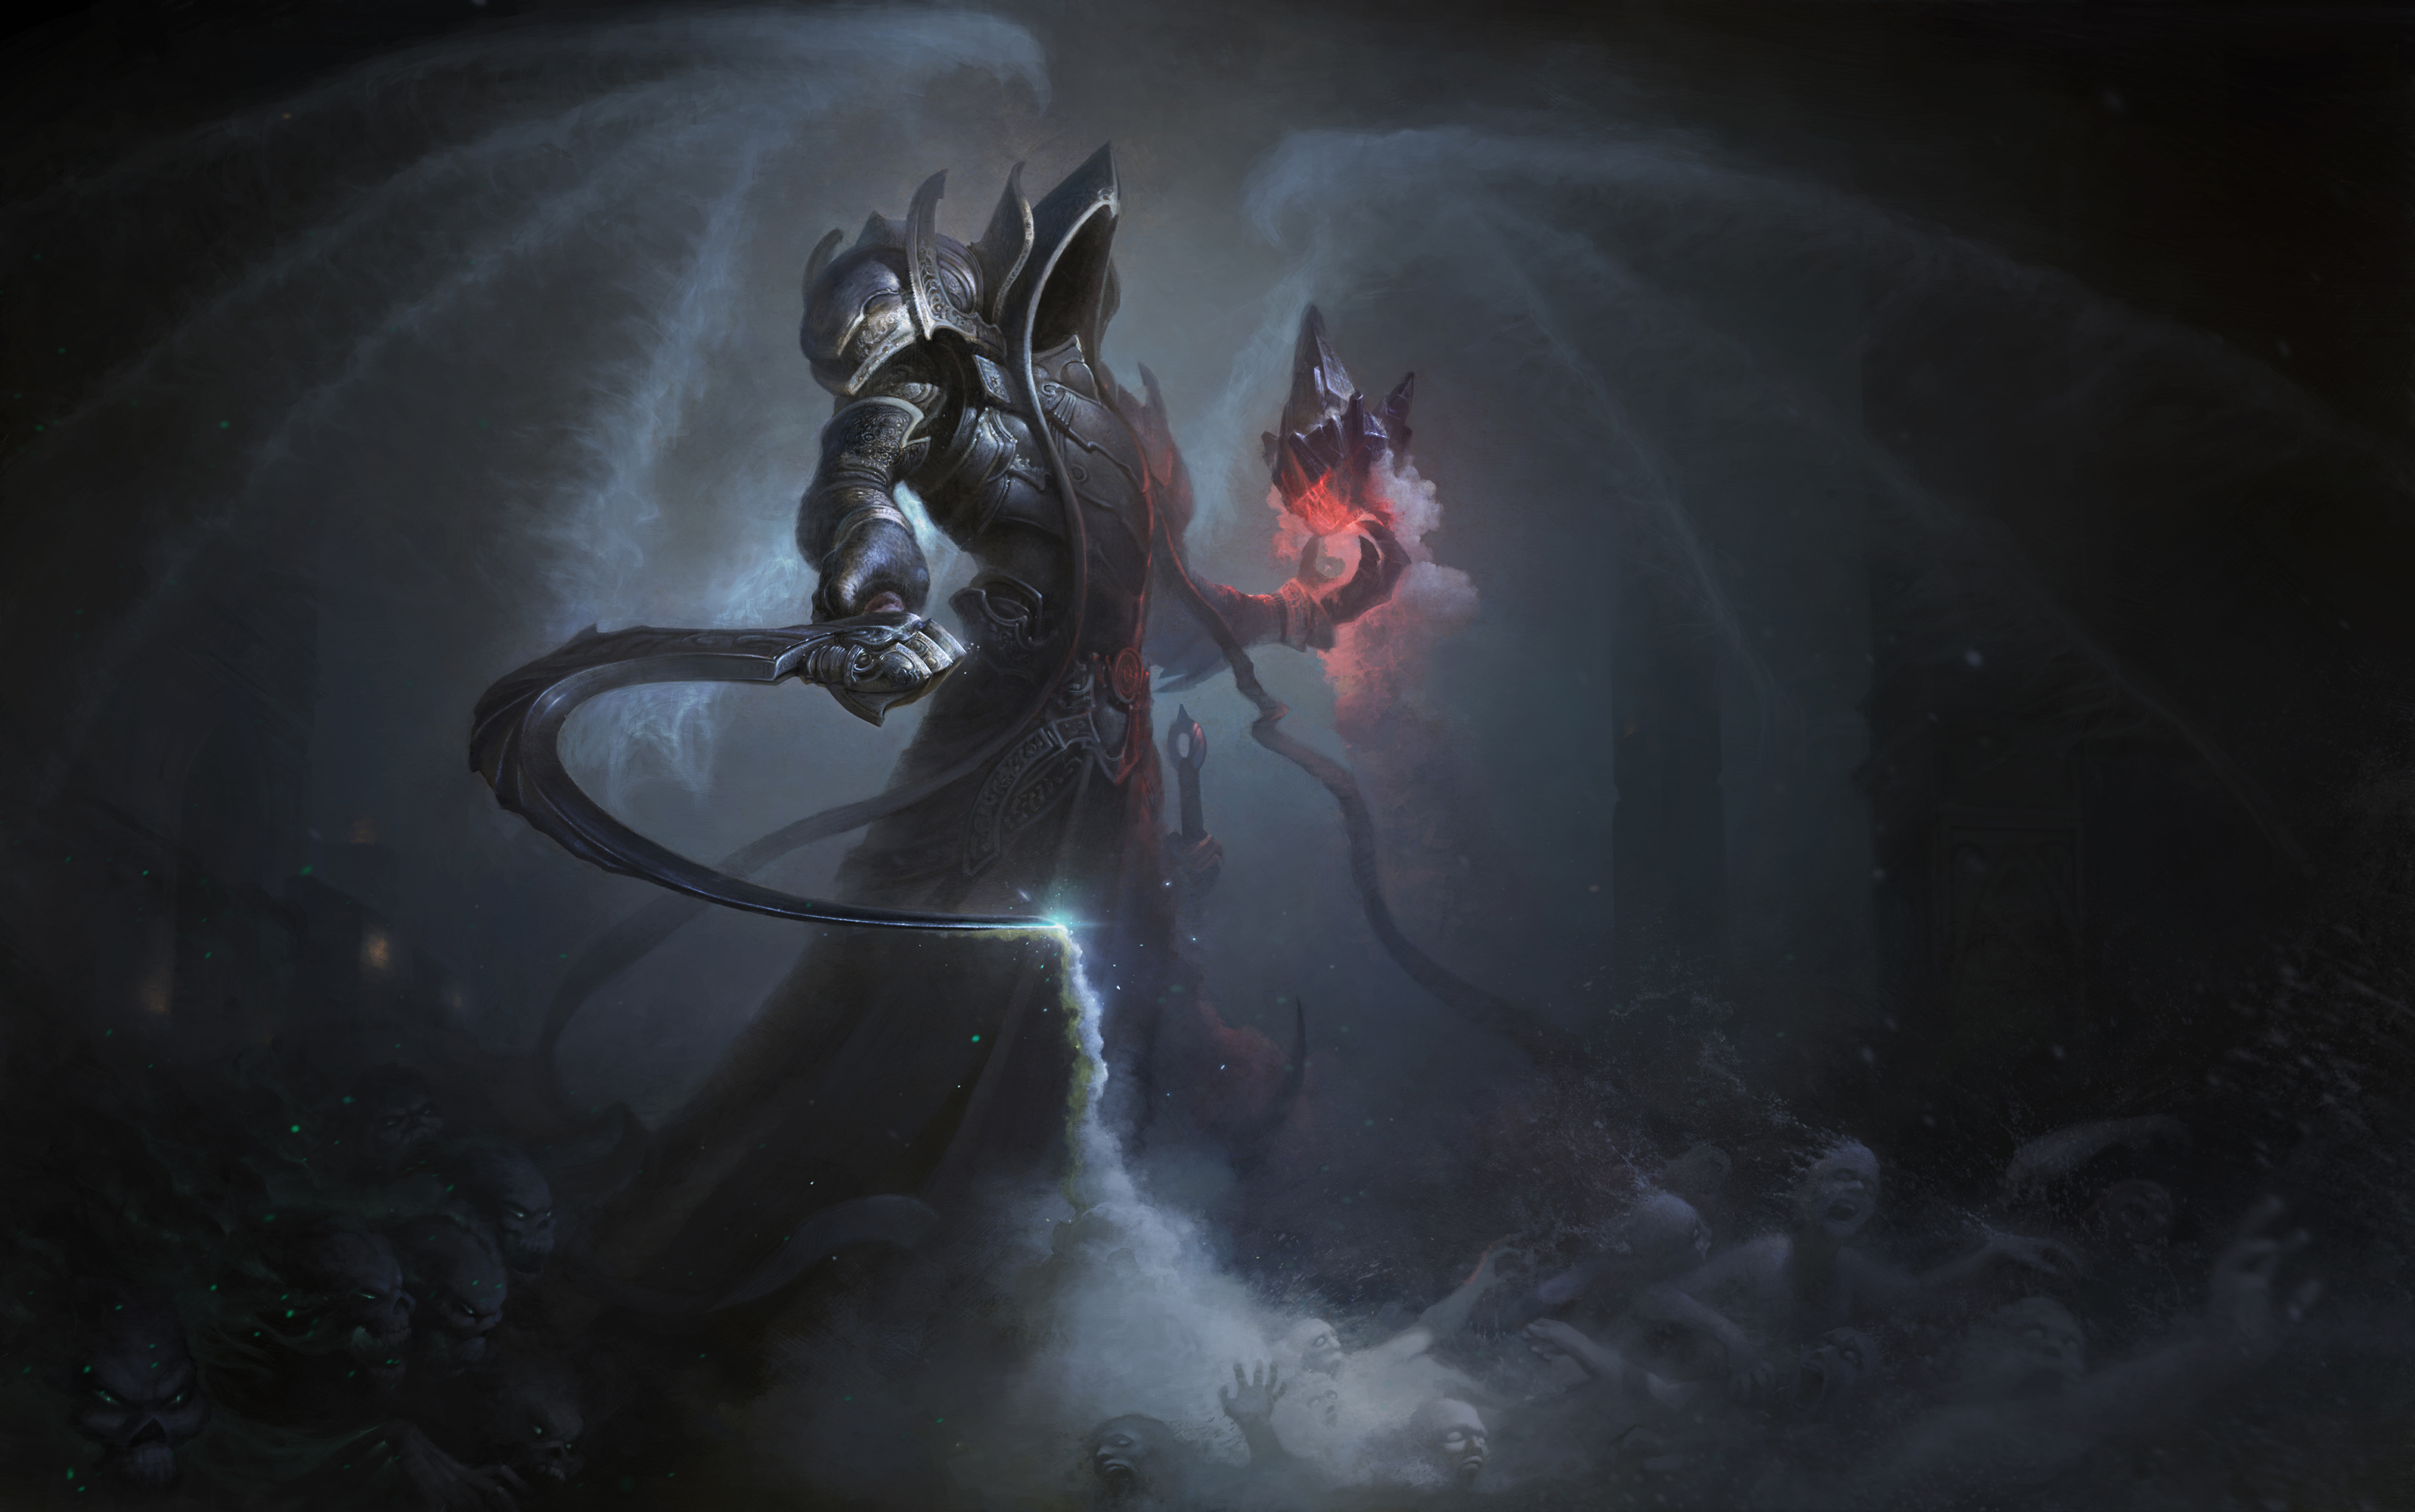 Malthael - Reaper of souls by Timens